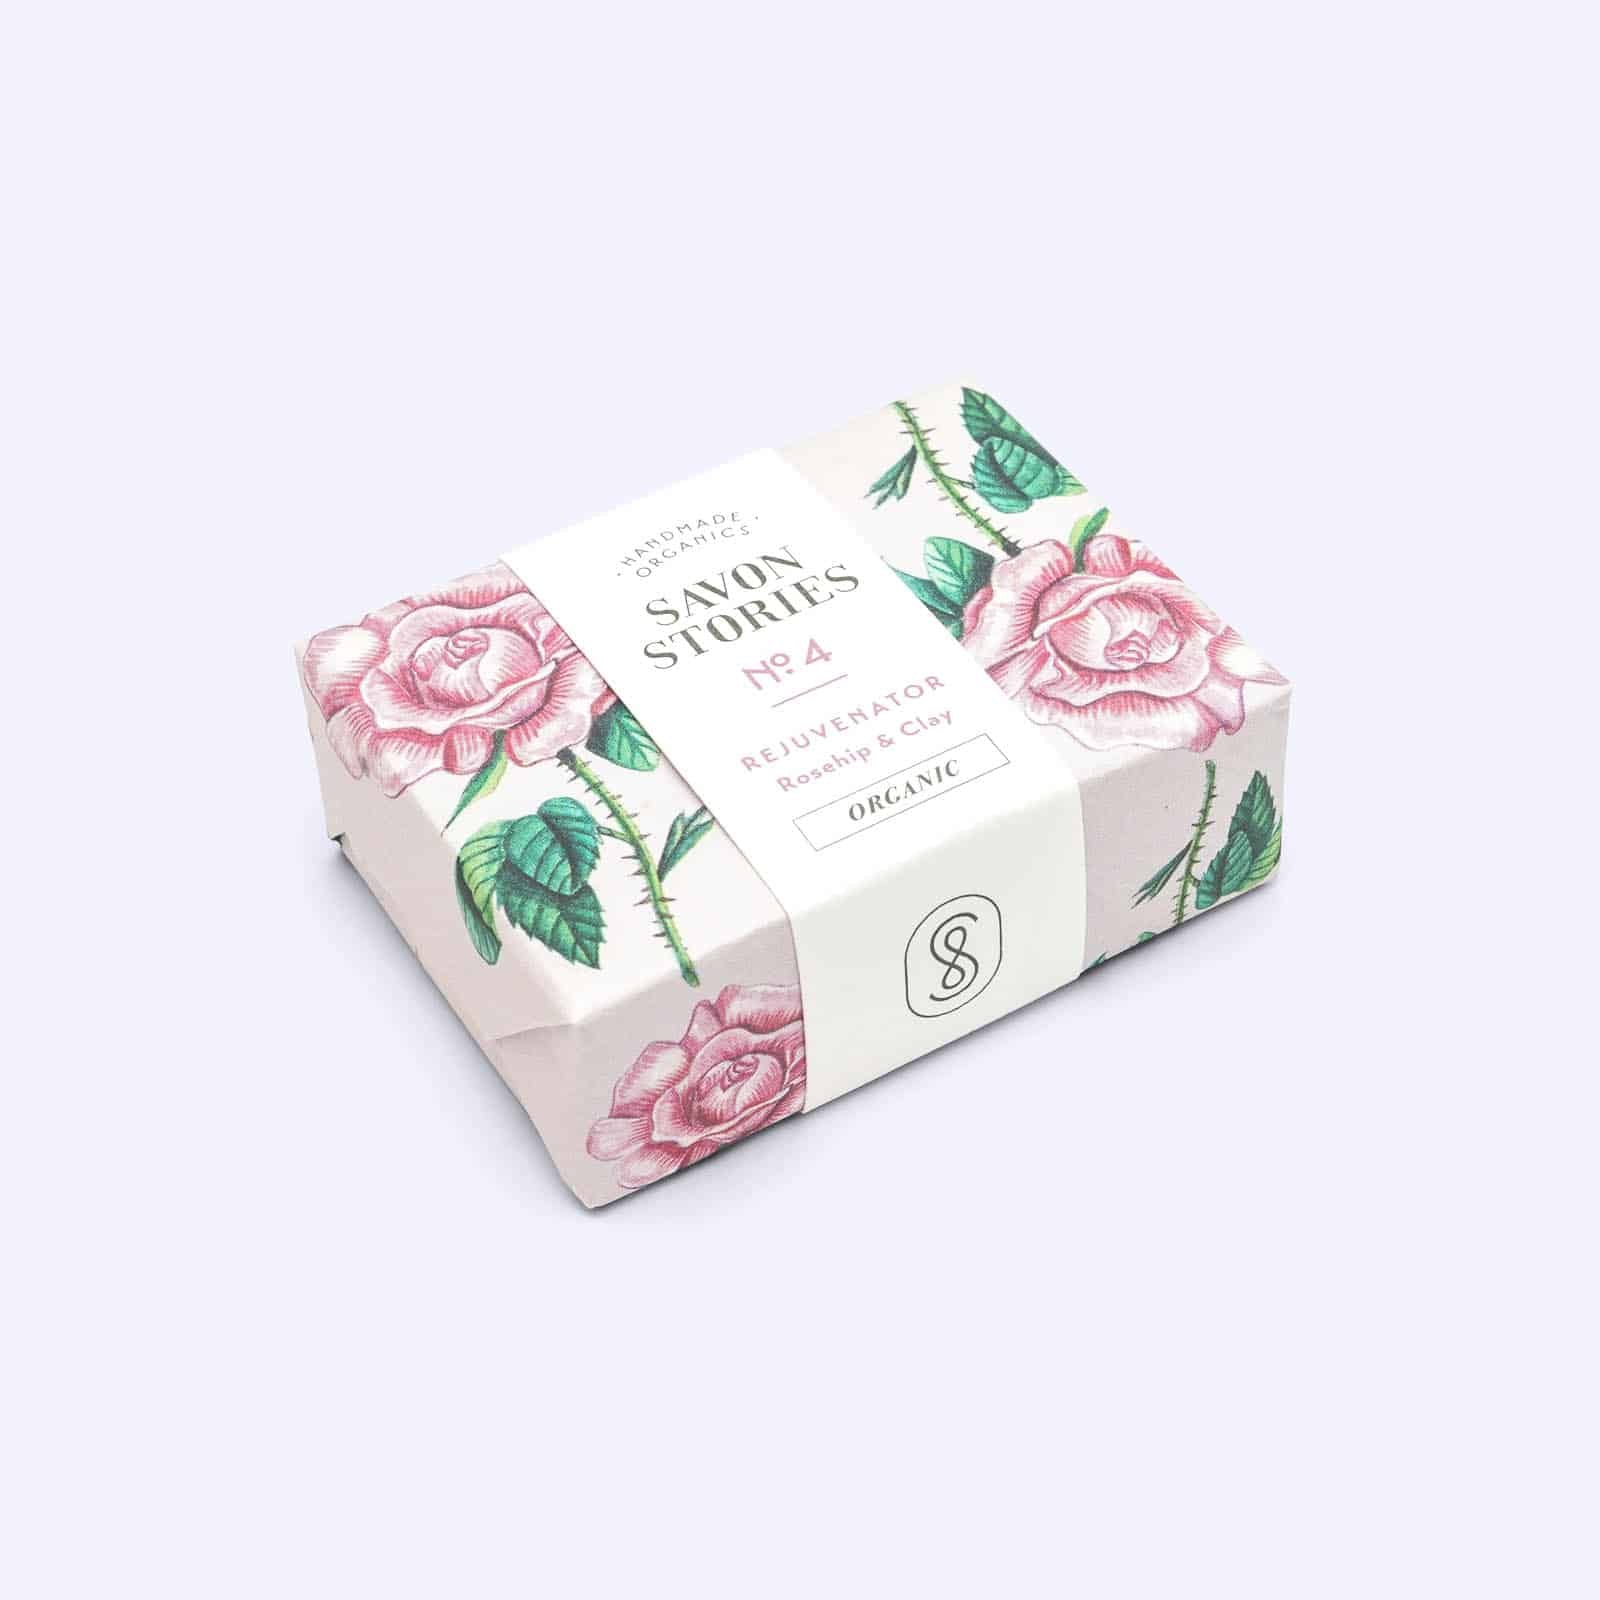 N°4 The Invigorating Organic &amp;amp; Natural Soap with Clay and Rose